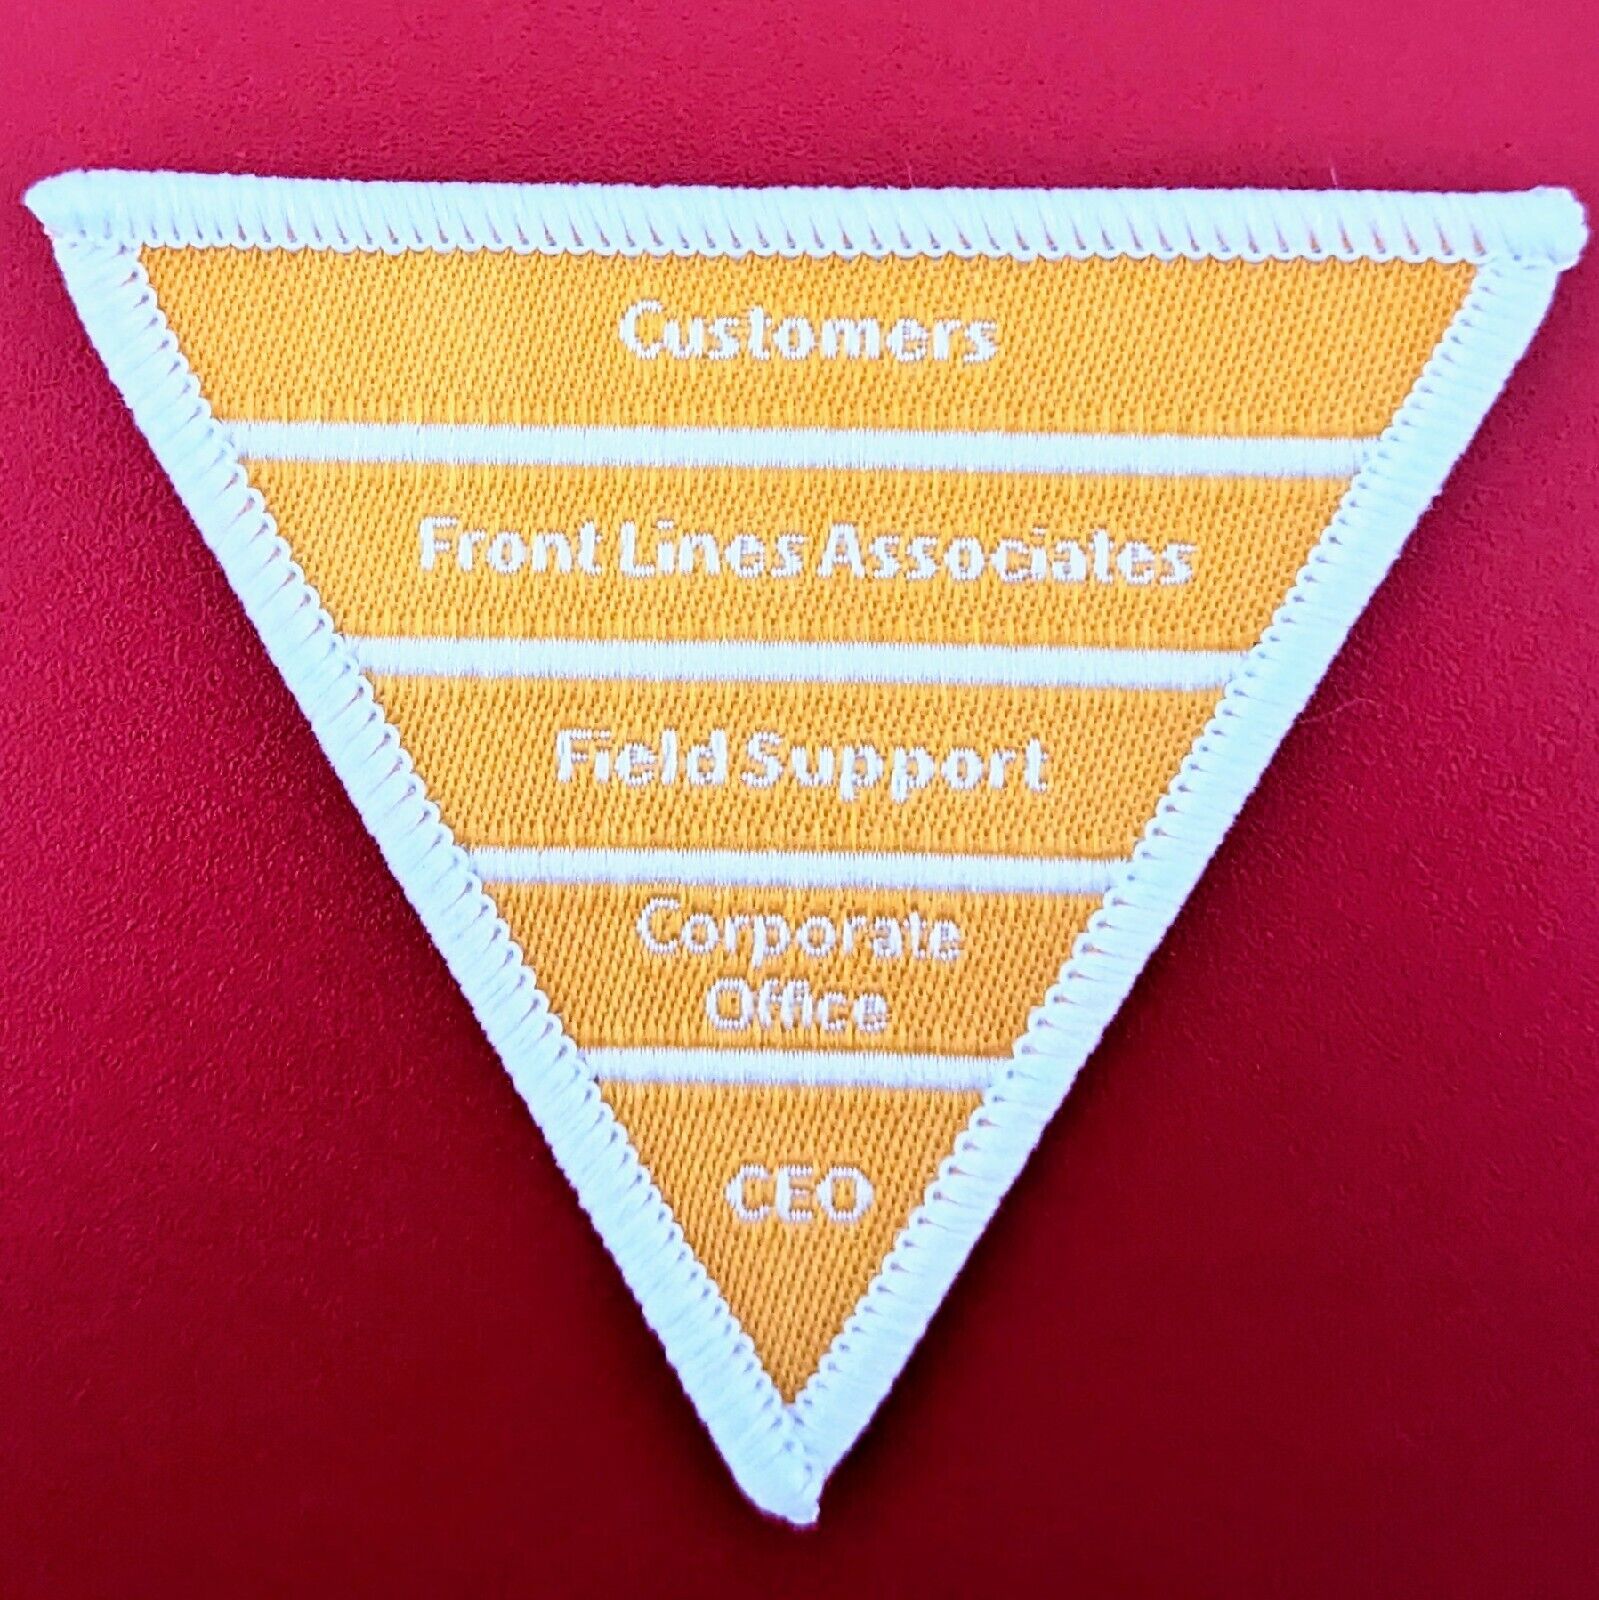 The Home Depot Apron Patch Inverted Pyramid Customer Service (Badge, Pin, Swag)